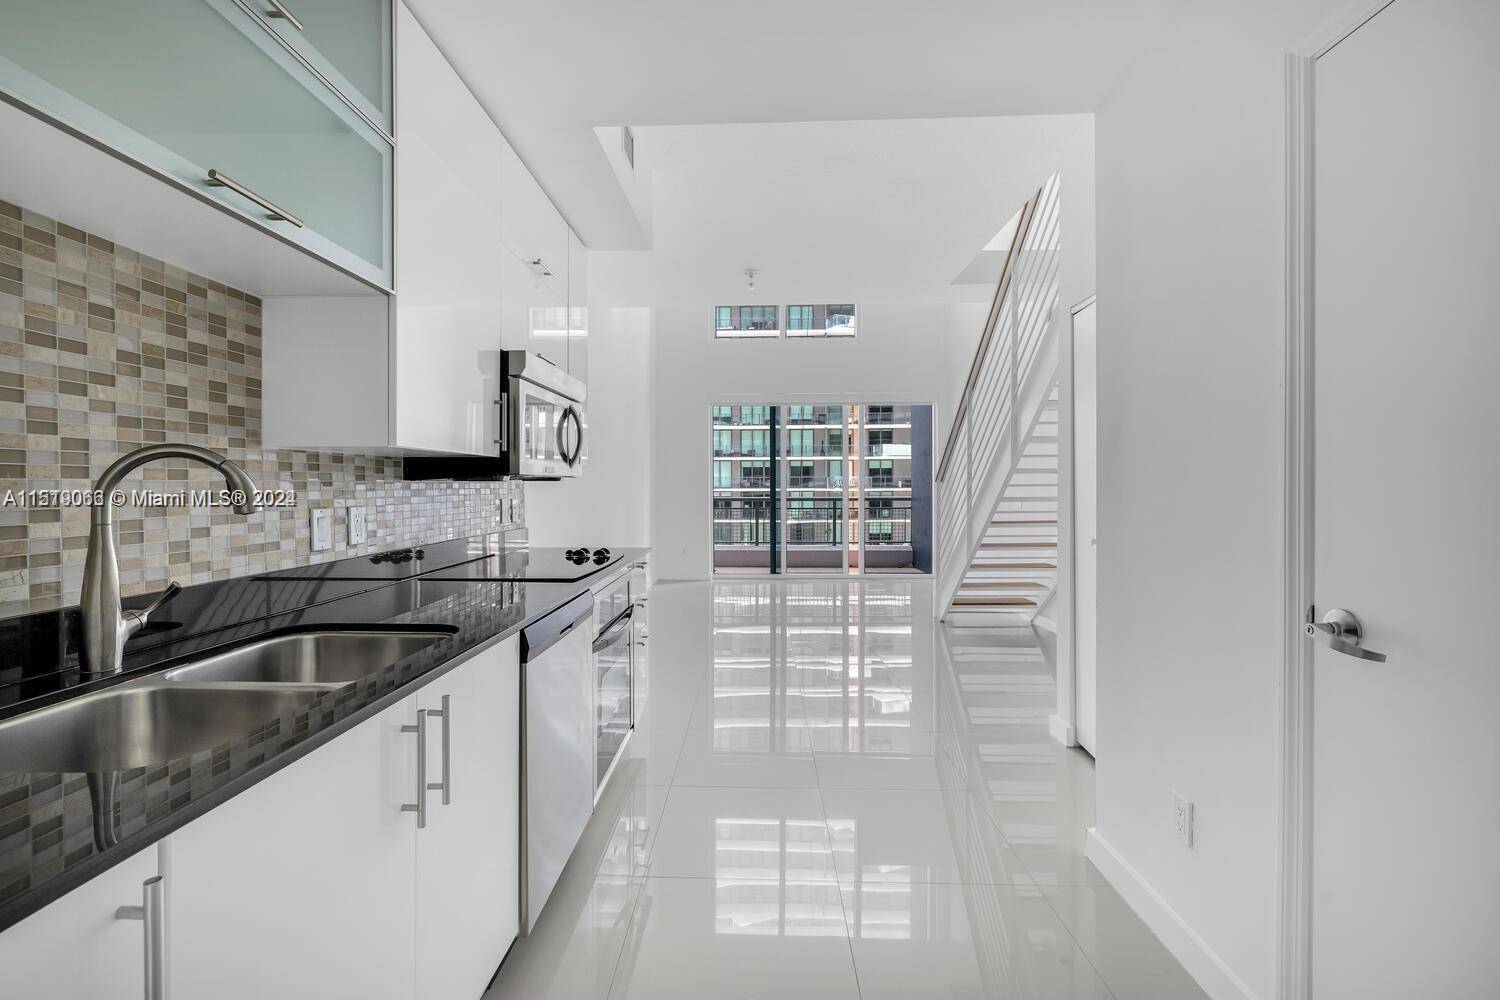 Welcome to Loft living at Infinity at Brickell for this spacious double high ceiling unit with modern white tile, gallery kitchen, half bathroom downstairs, floor to ceiling windows open loft ...